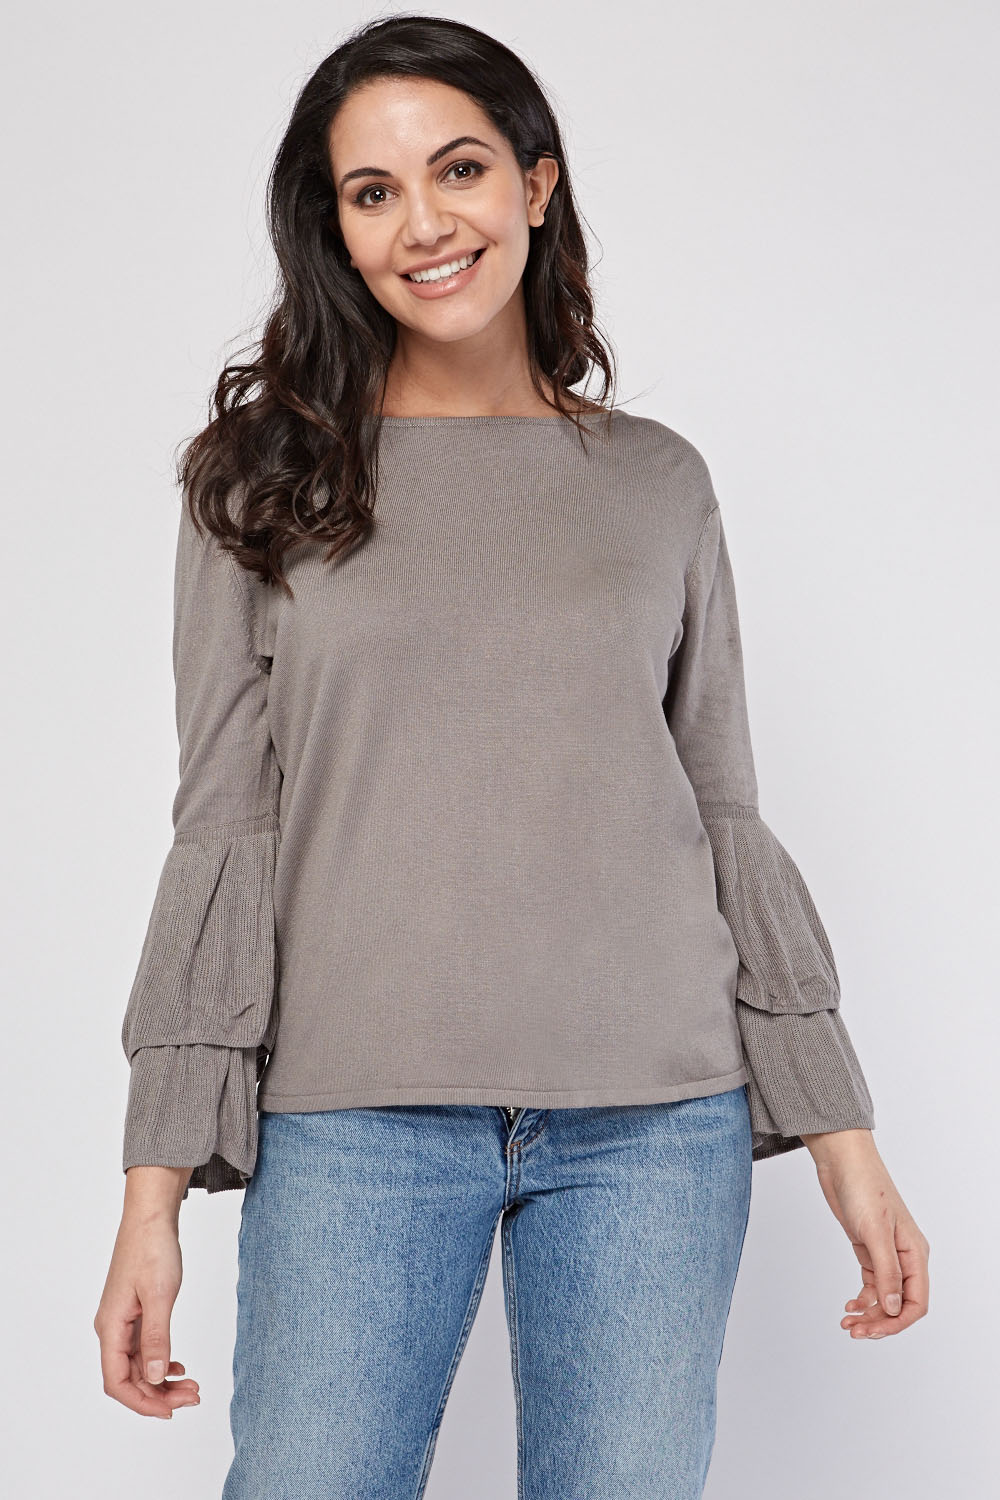 Tiered Ruffle Sleeve Knit Top - Just $7